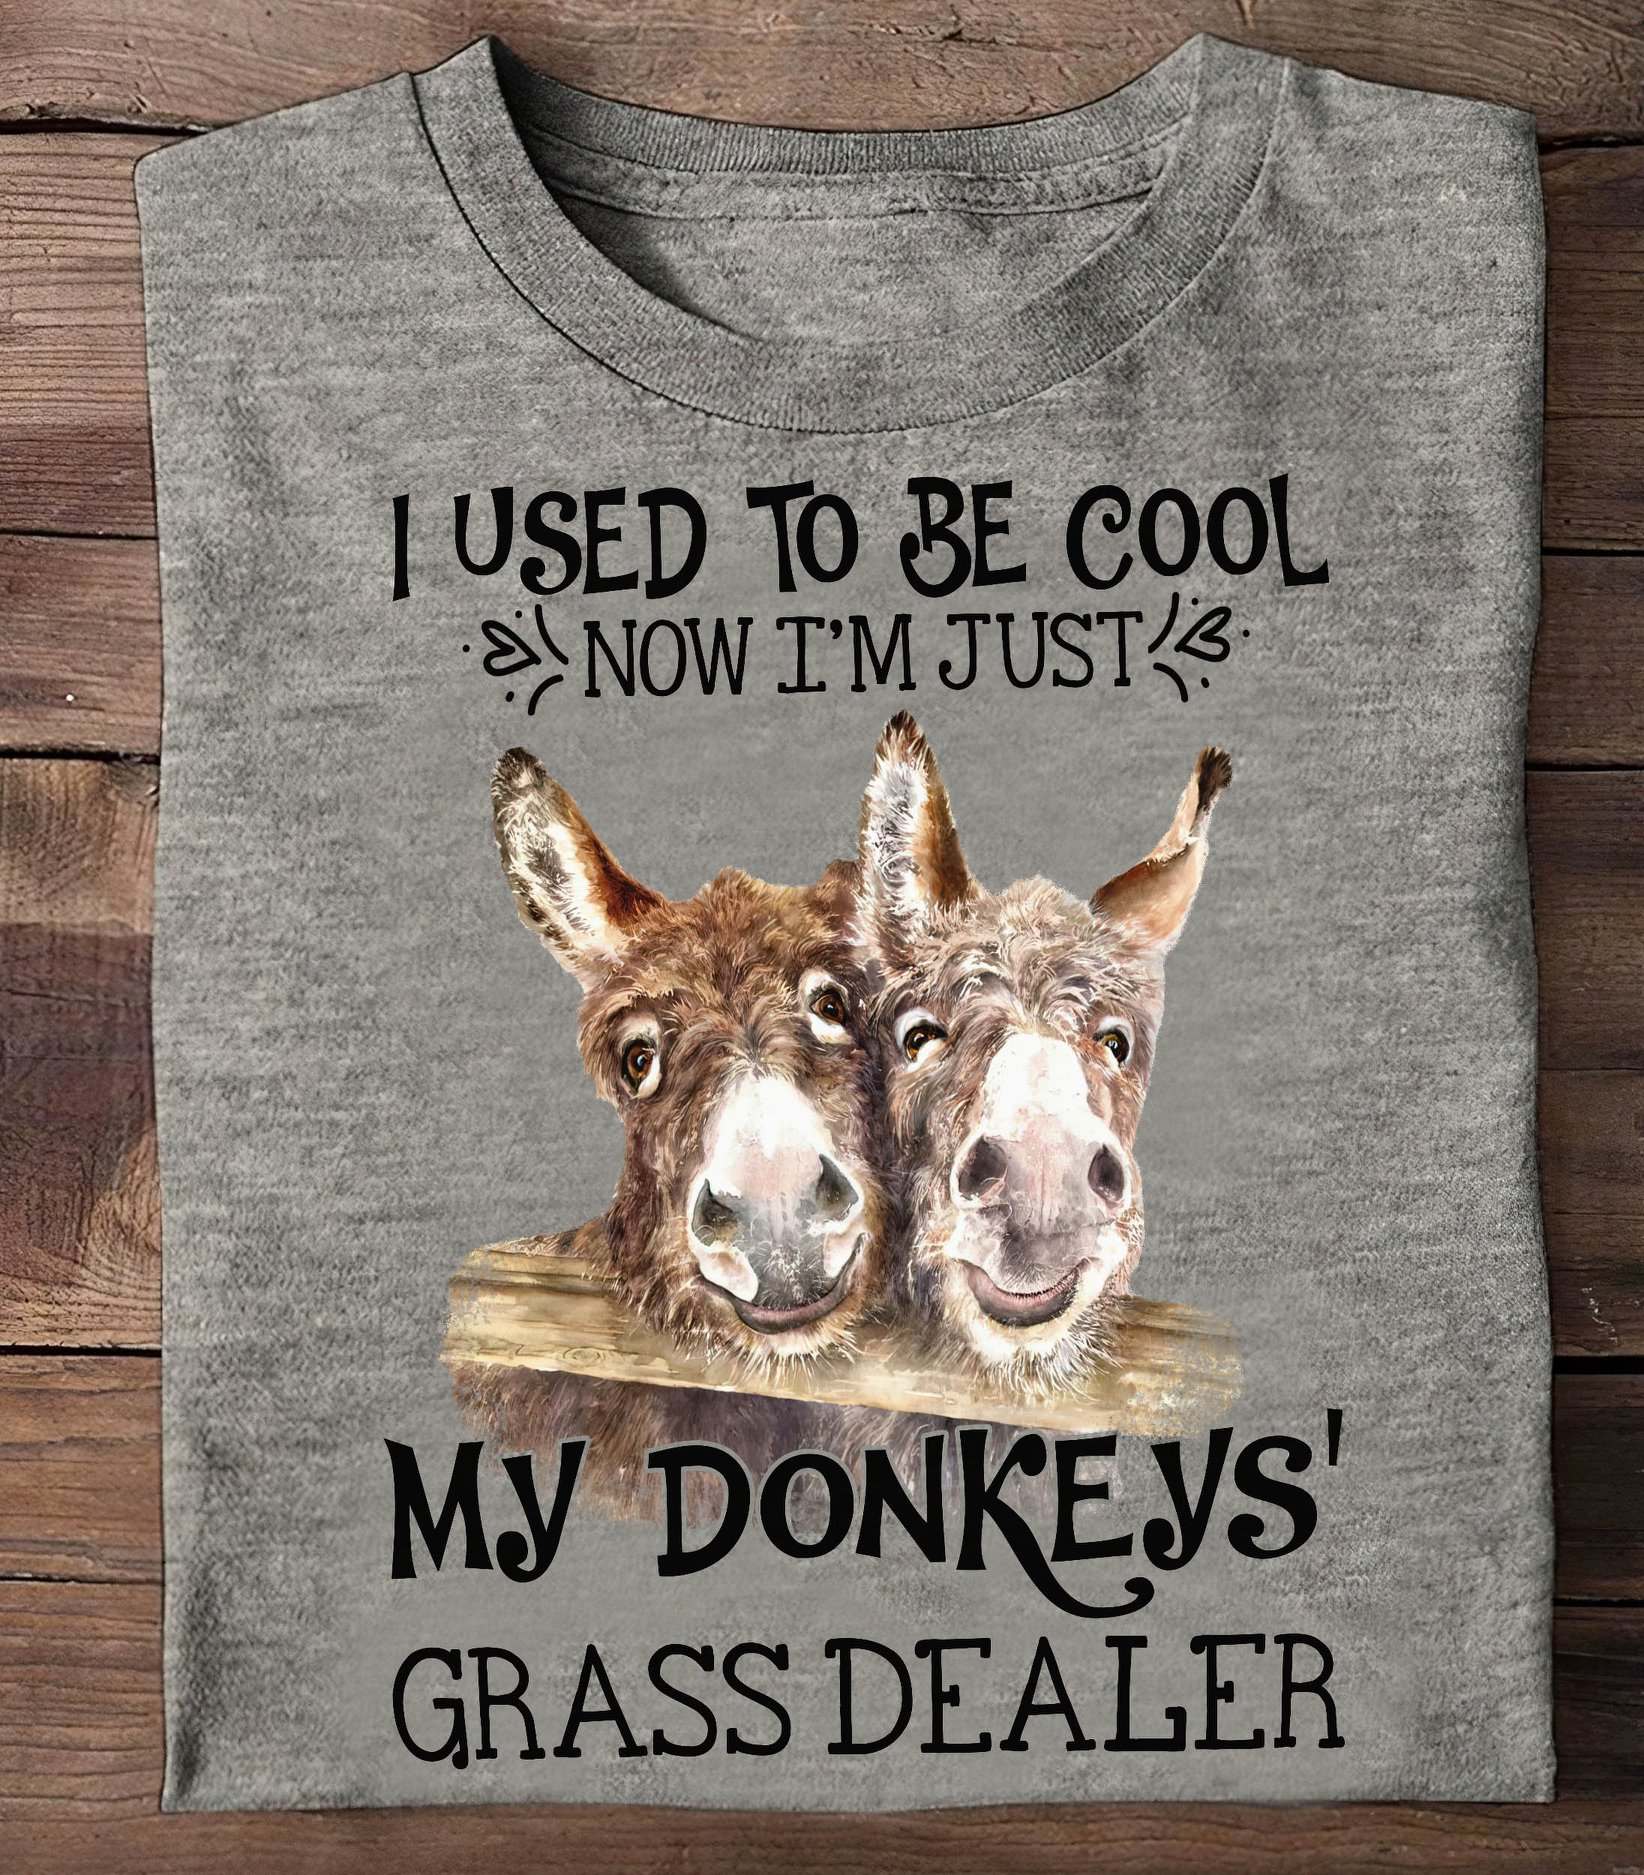 I used to be cool now I'm just my donkey's grass dealer - Donkey lover